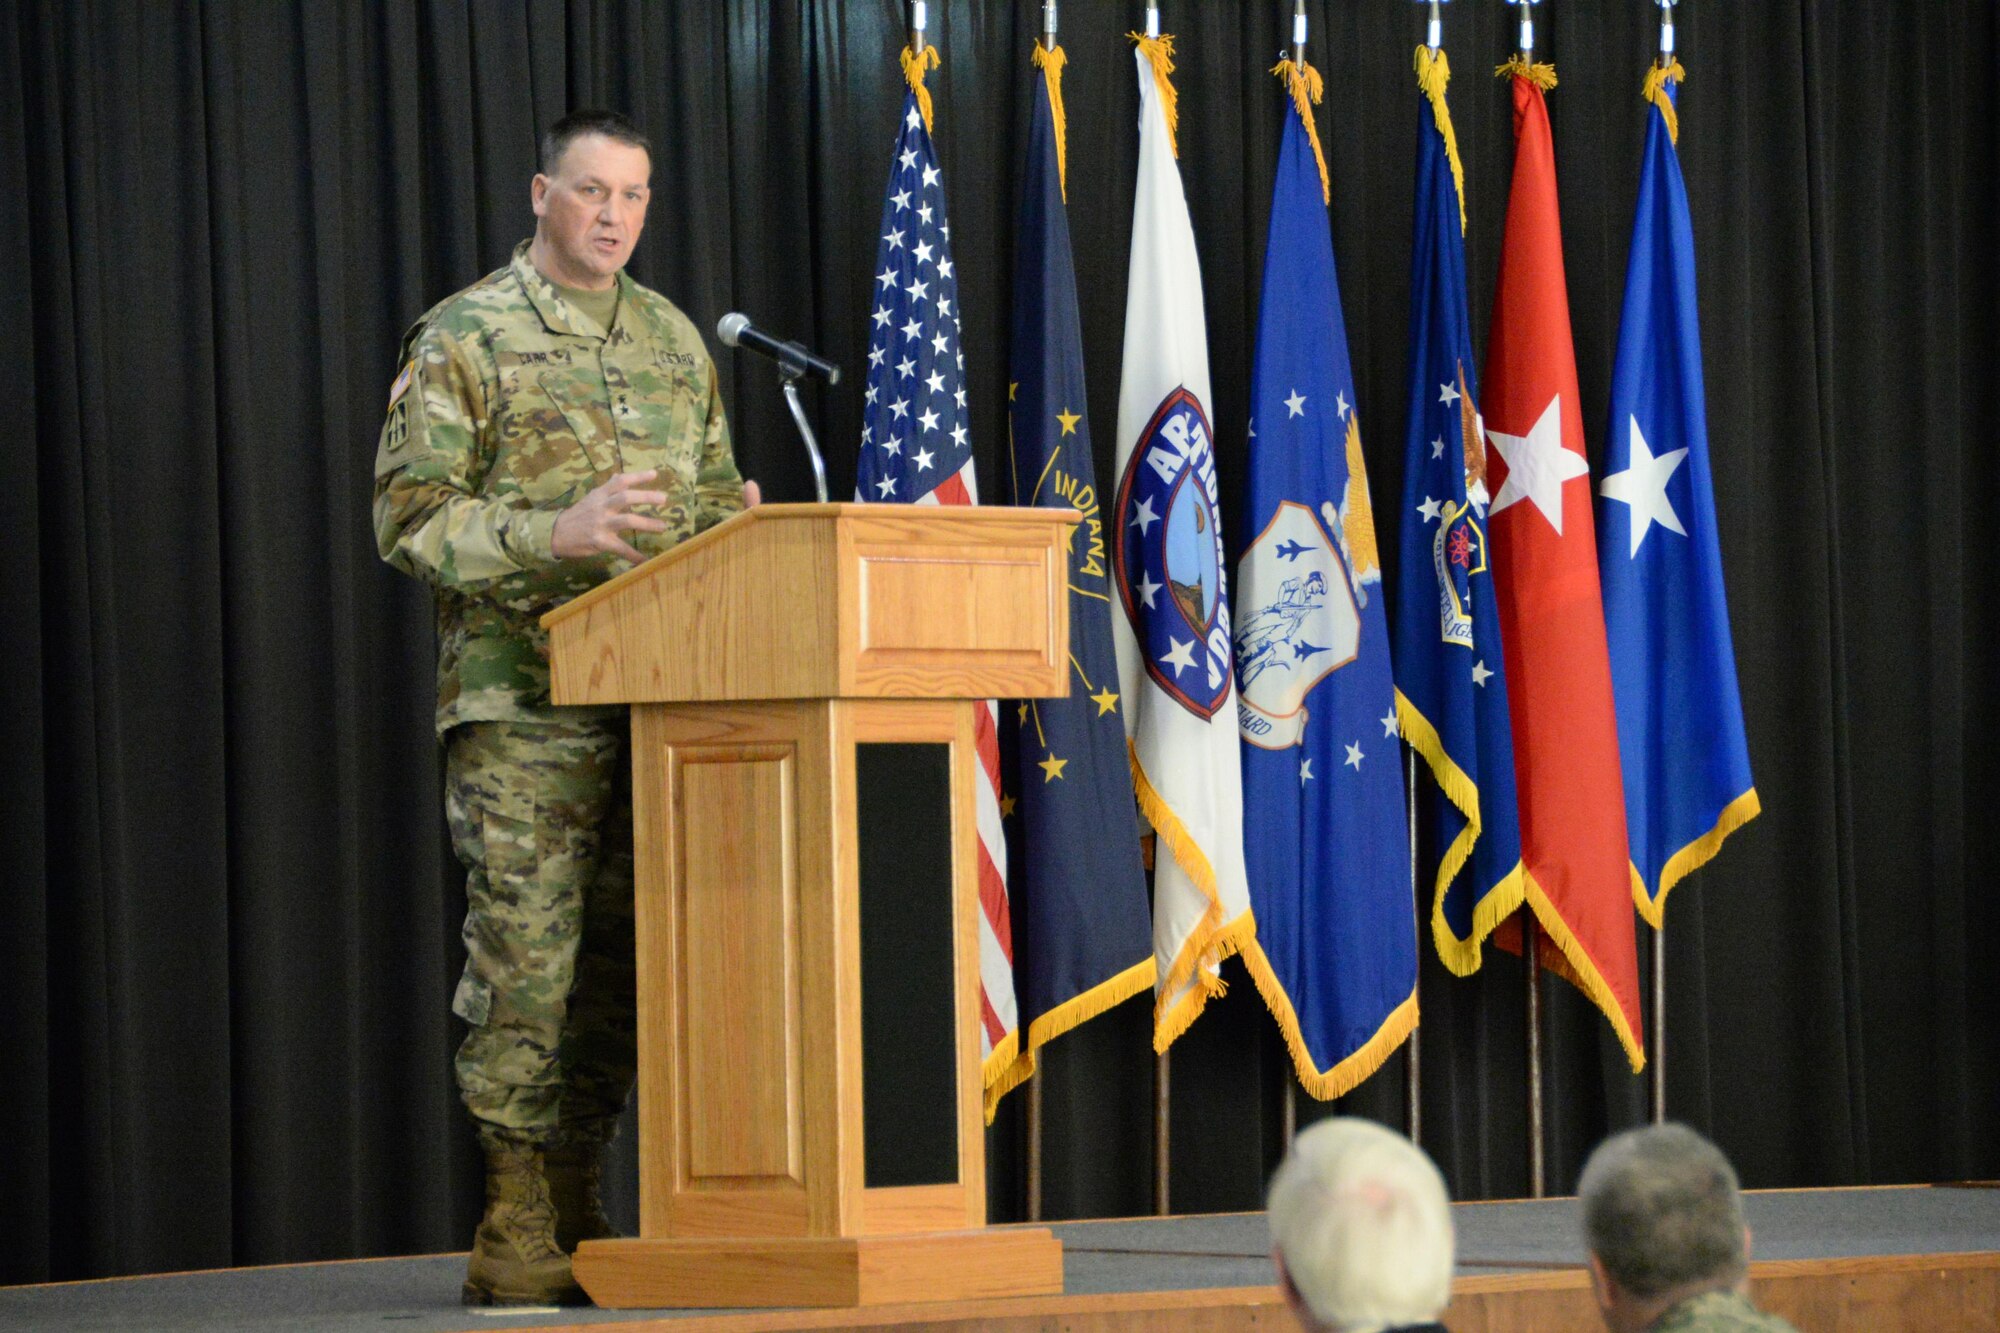 U.S. Army Maj. Gen. Courtney P. Carr, the Adjutant General of Indiana, speaks to the Airmen of the 181st Intelligence Wing during an assumption of command ceremony for Col. Chris Alderdice, commander 181st Intelligence Wing, Feb. 4, 2017, at Hulman Field Air National Guard Base, Terre Haute, Ind. (U.S. Air National Guard photo by Senior Airman Kevin D. Schulze)